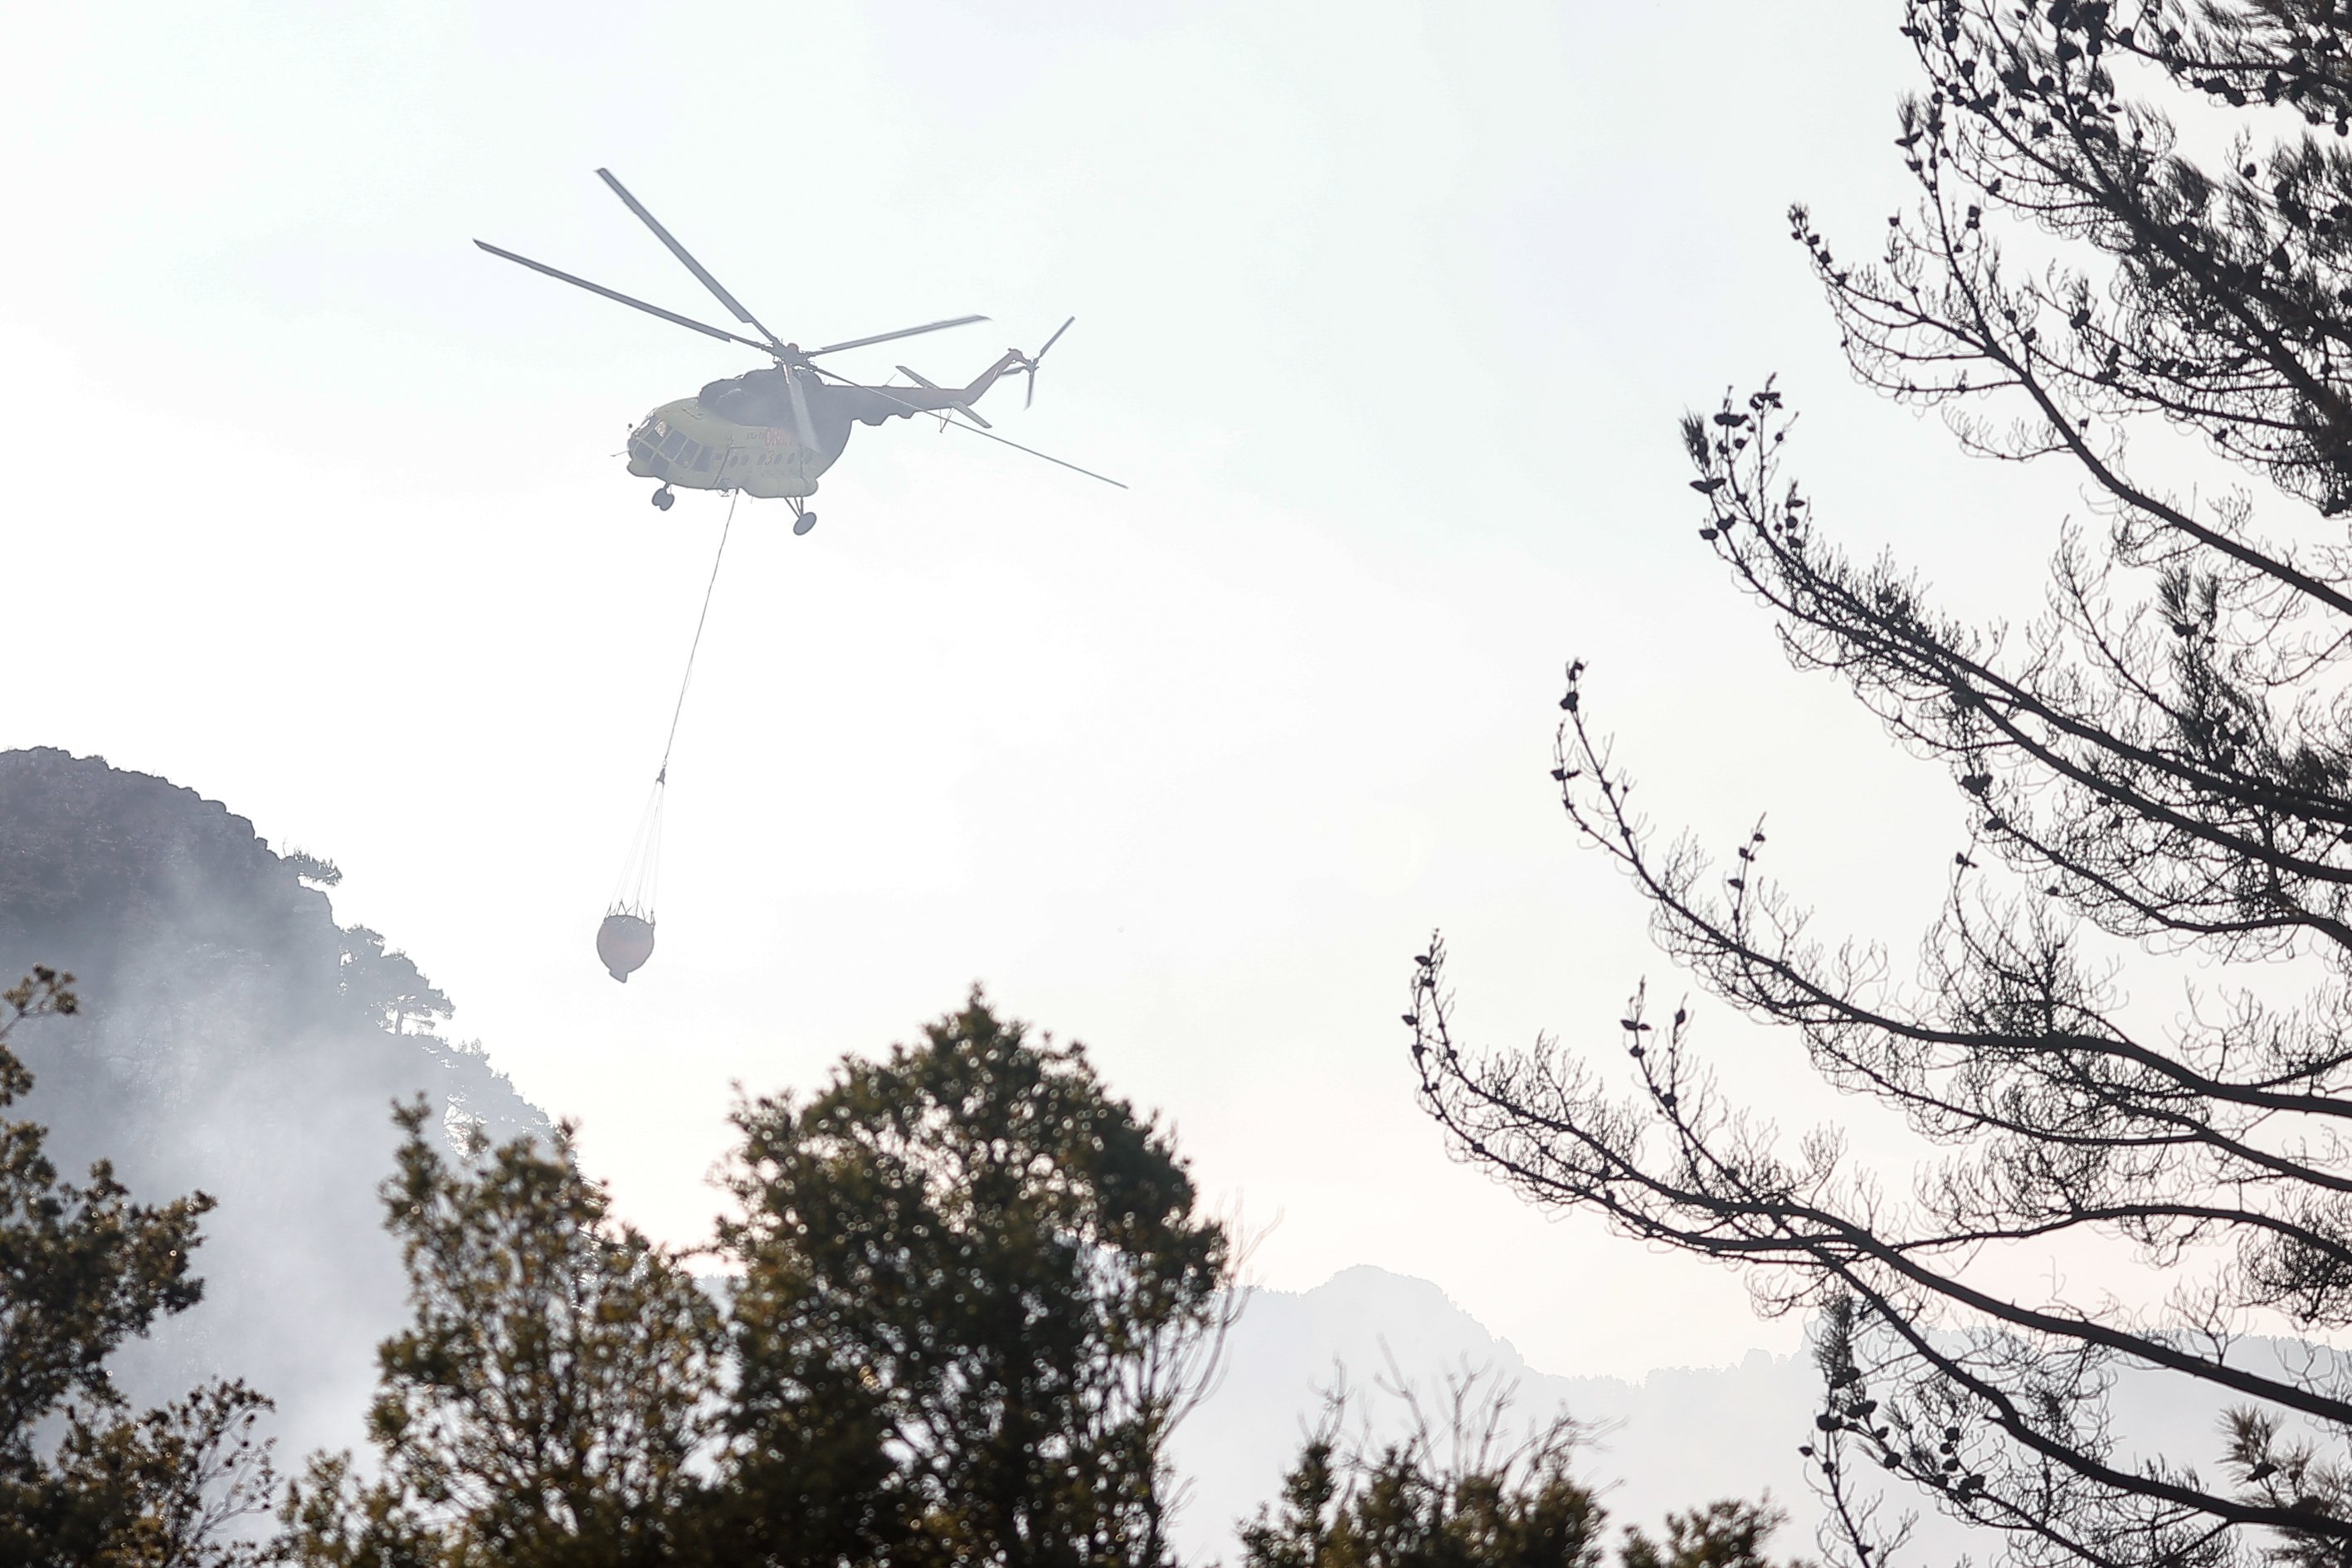 A helicopter participates in efforts to put out a wildfire in Kemer district of Antalya, Turkey, Oct. 13, 2021. (AA Photo)